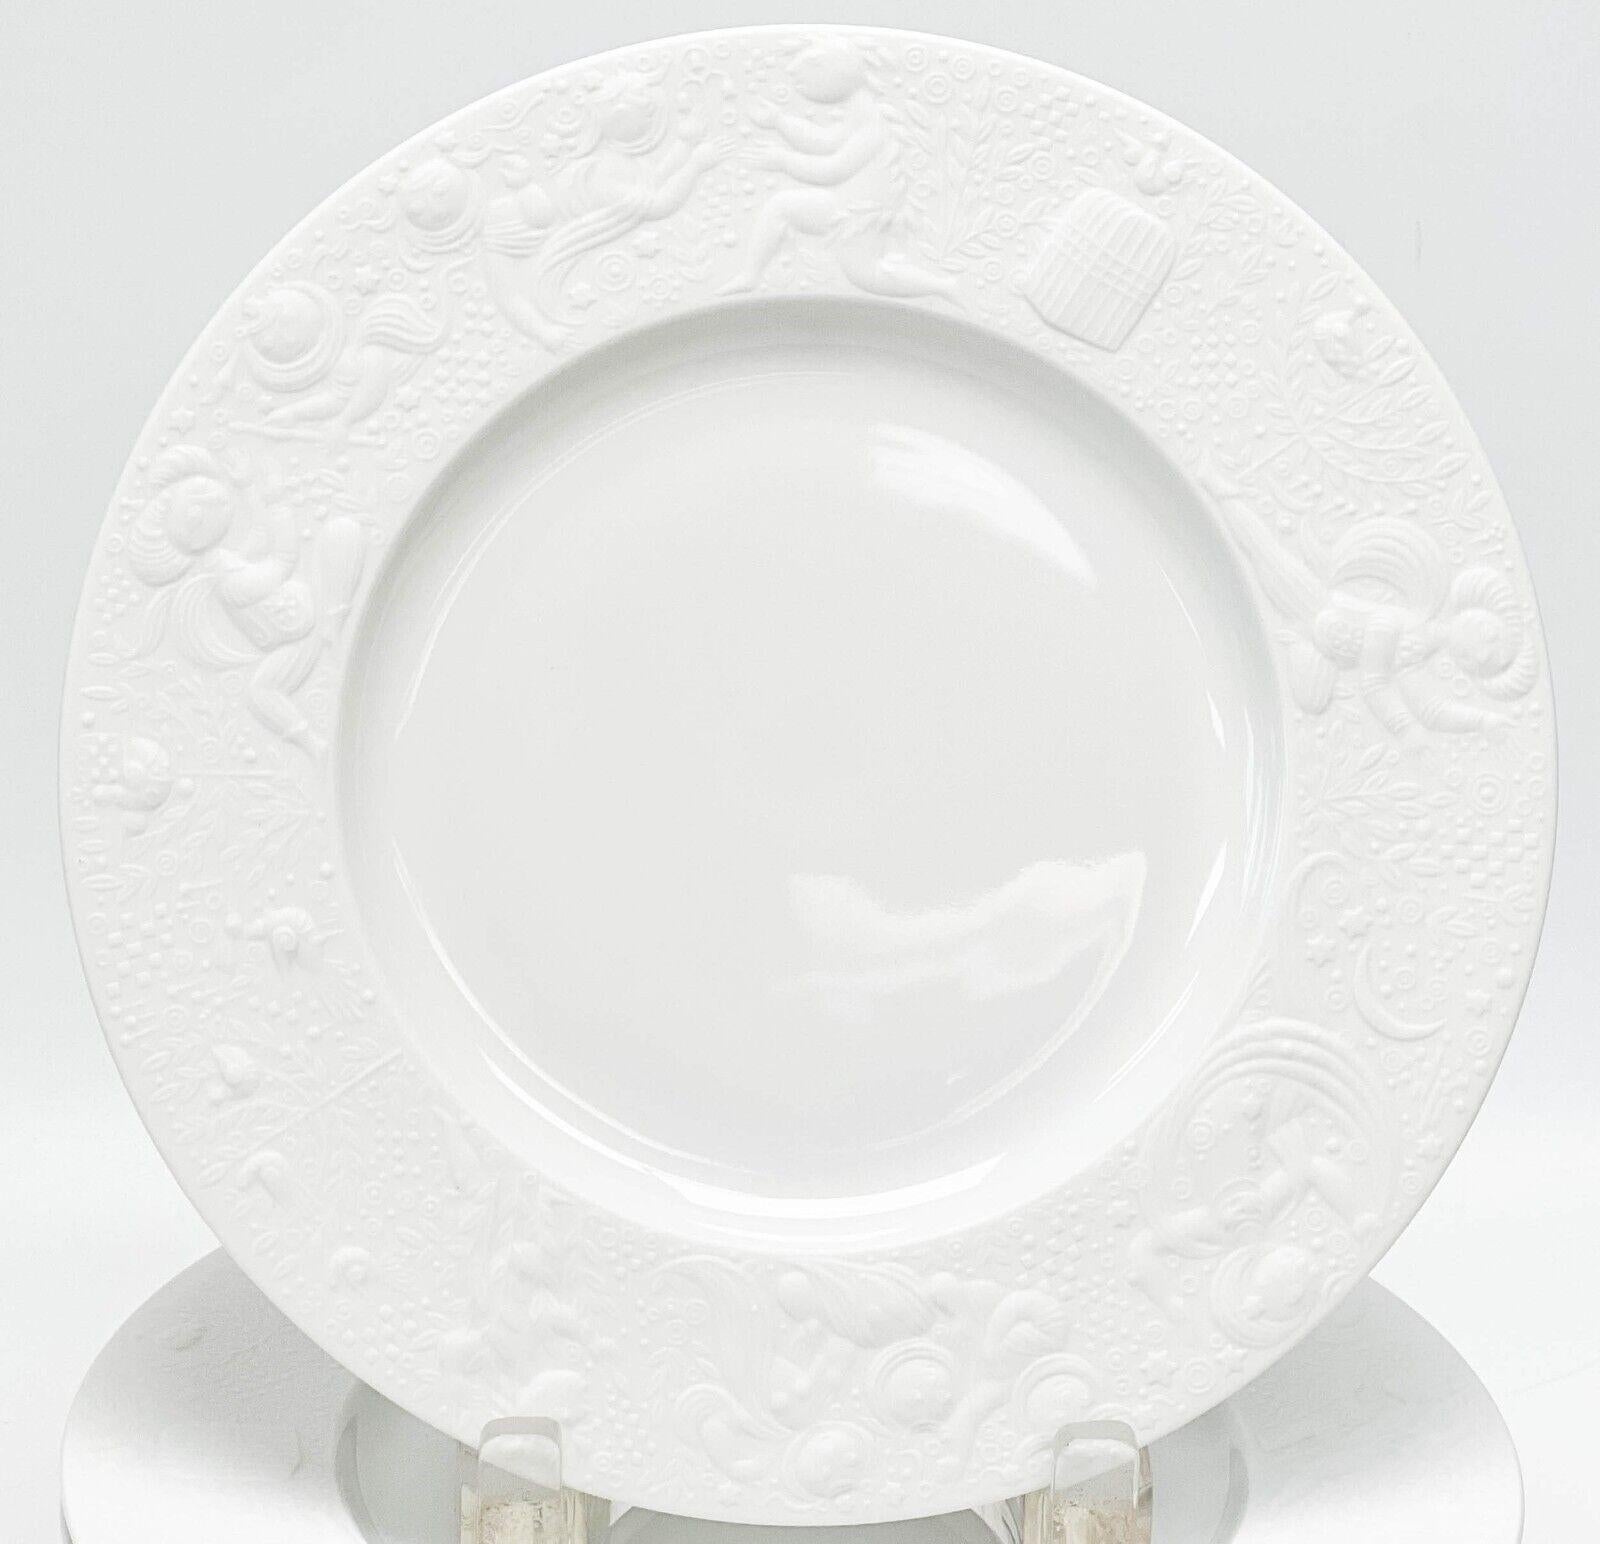 Set of 12 Rosenthal Germany Porcelain Salad Plates in Magic Flute White

White porcelain with embossed figures around the rim with a matte finish. Underside marked Rosenthal Germany, Bijorn Wiinblad and with various gold lettering to the underside